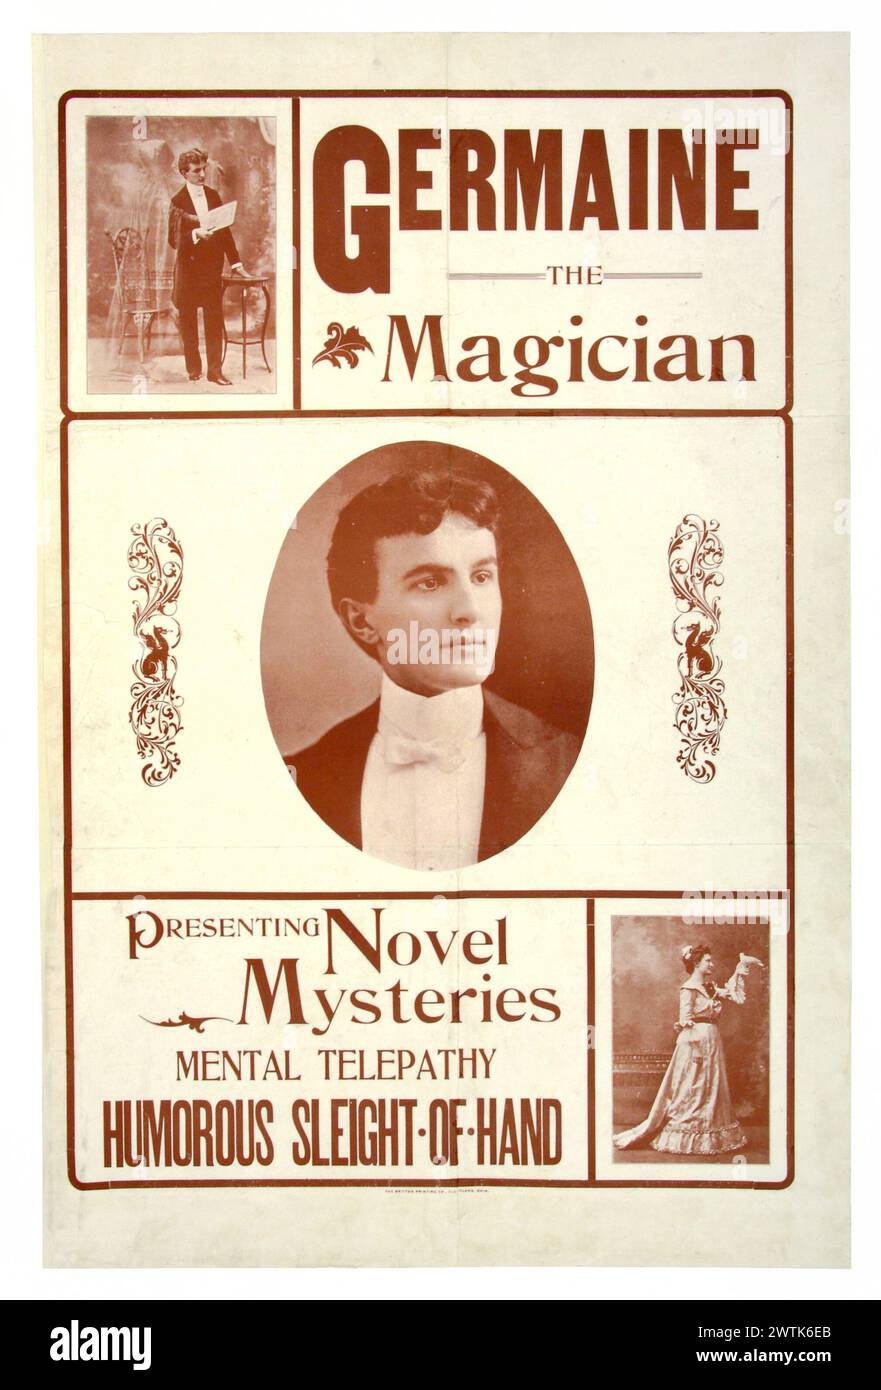 Magic poster - Germaine The Magician Presenting Novel Mysteries, Mental Telepathy and Humorous Sleight of Hand Stock Photo